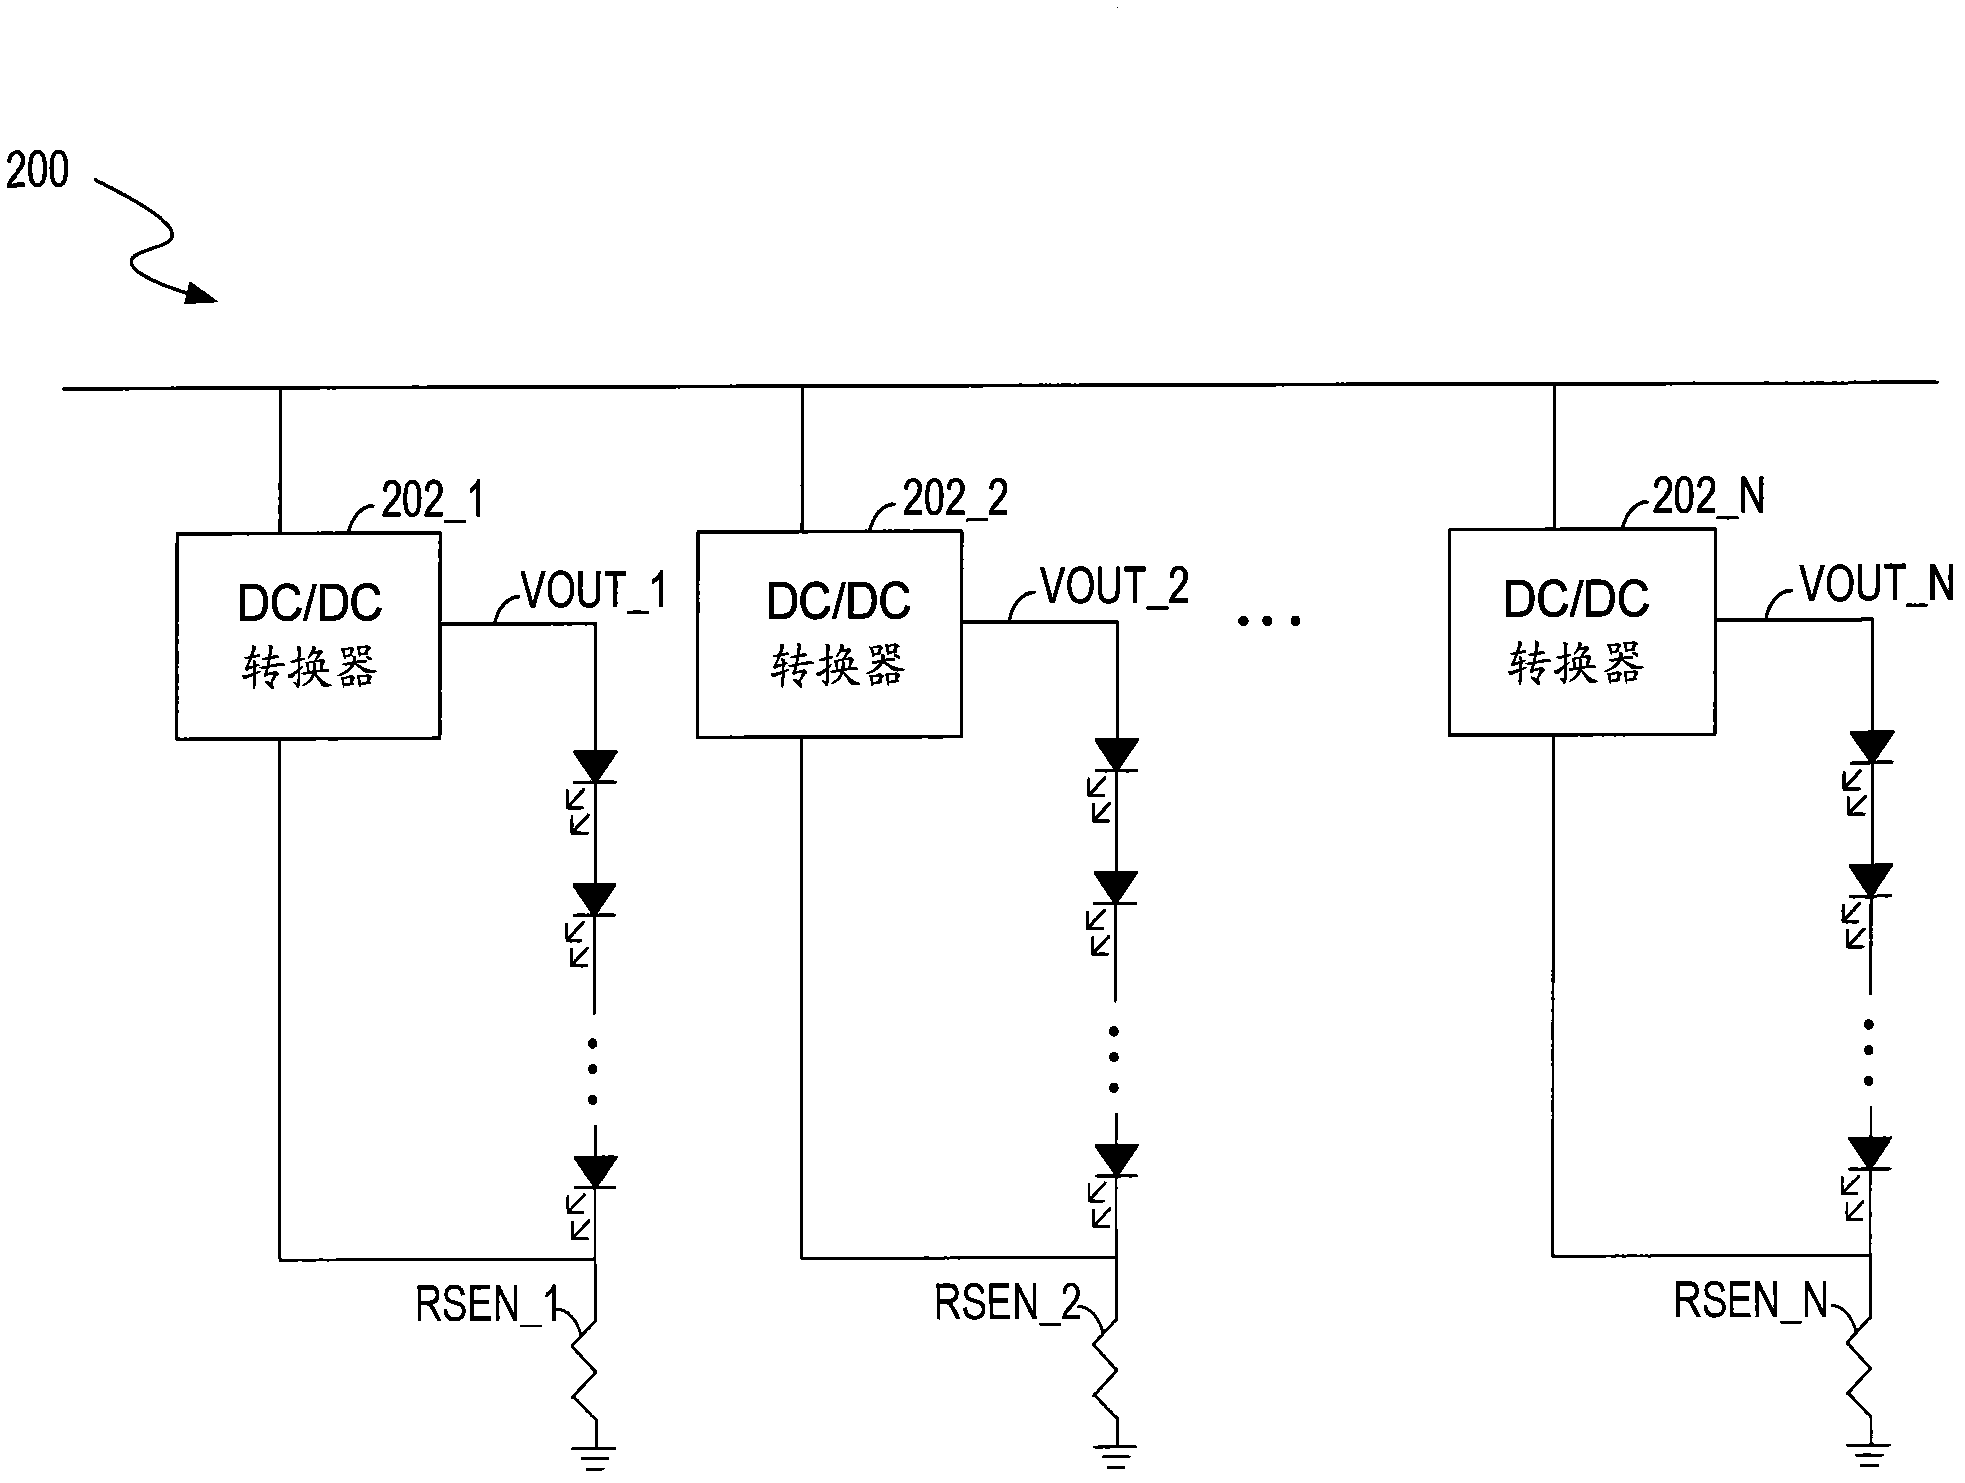 Circuits and methods for driving light sources